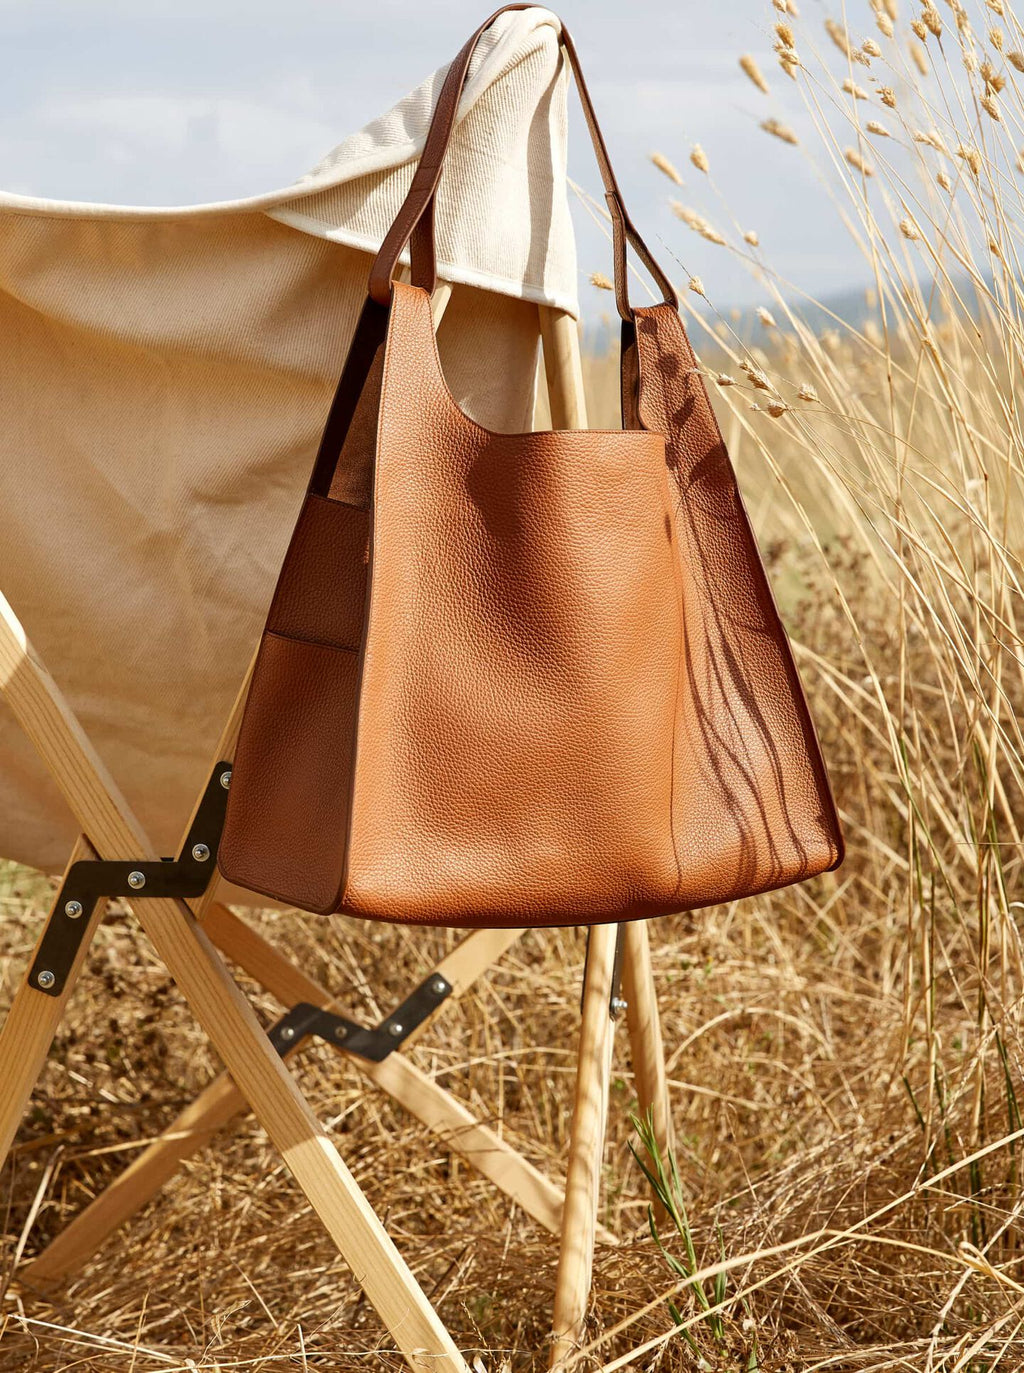 A handbag hanging on a folding chair in a field with tall grasses.